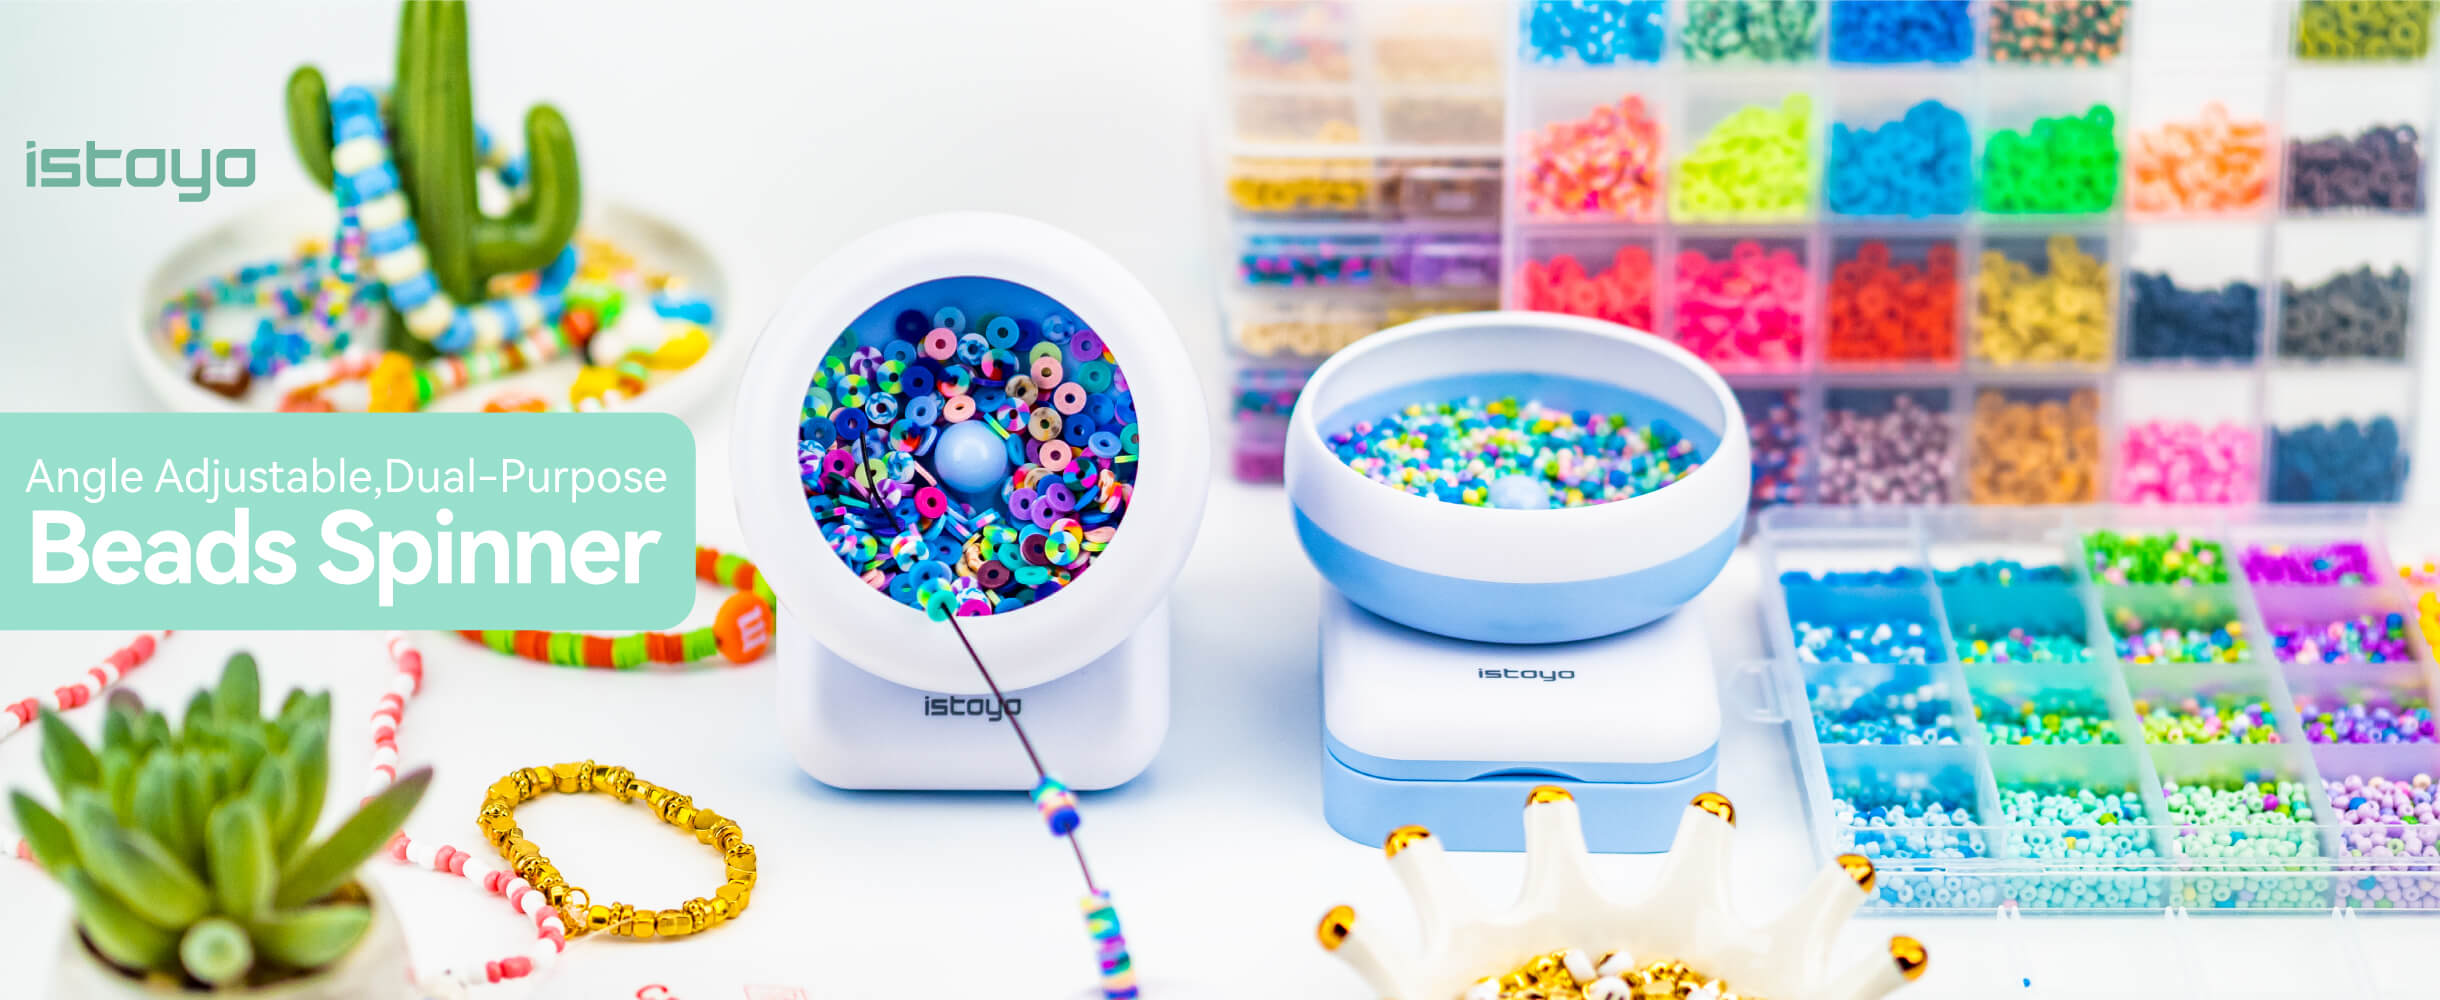 Unboxing Review! Hobbyworker Electric Bead Spinner 